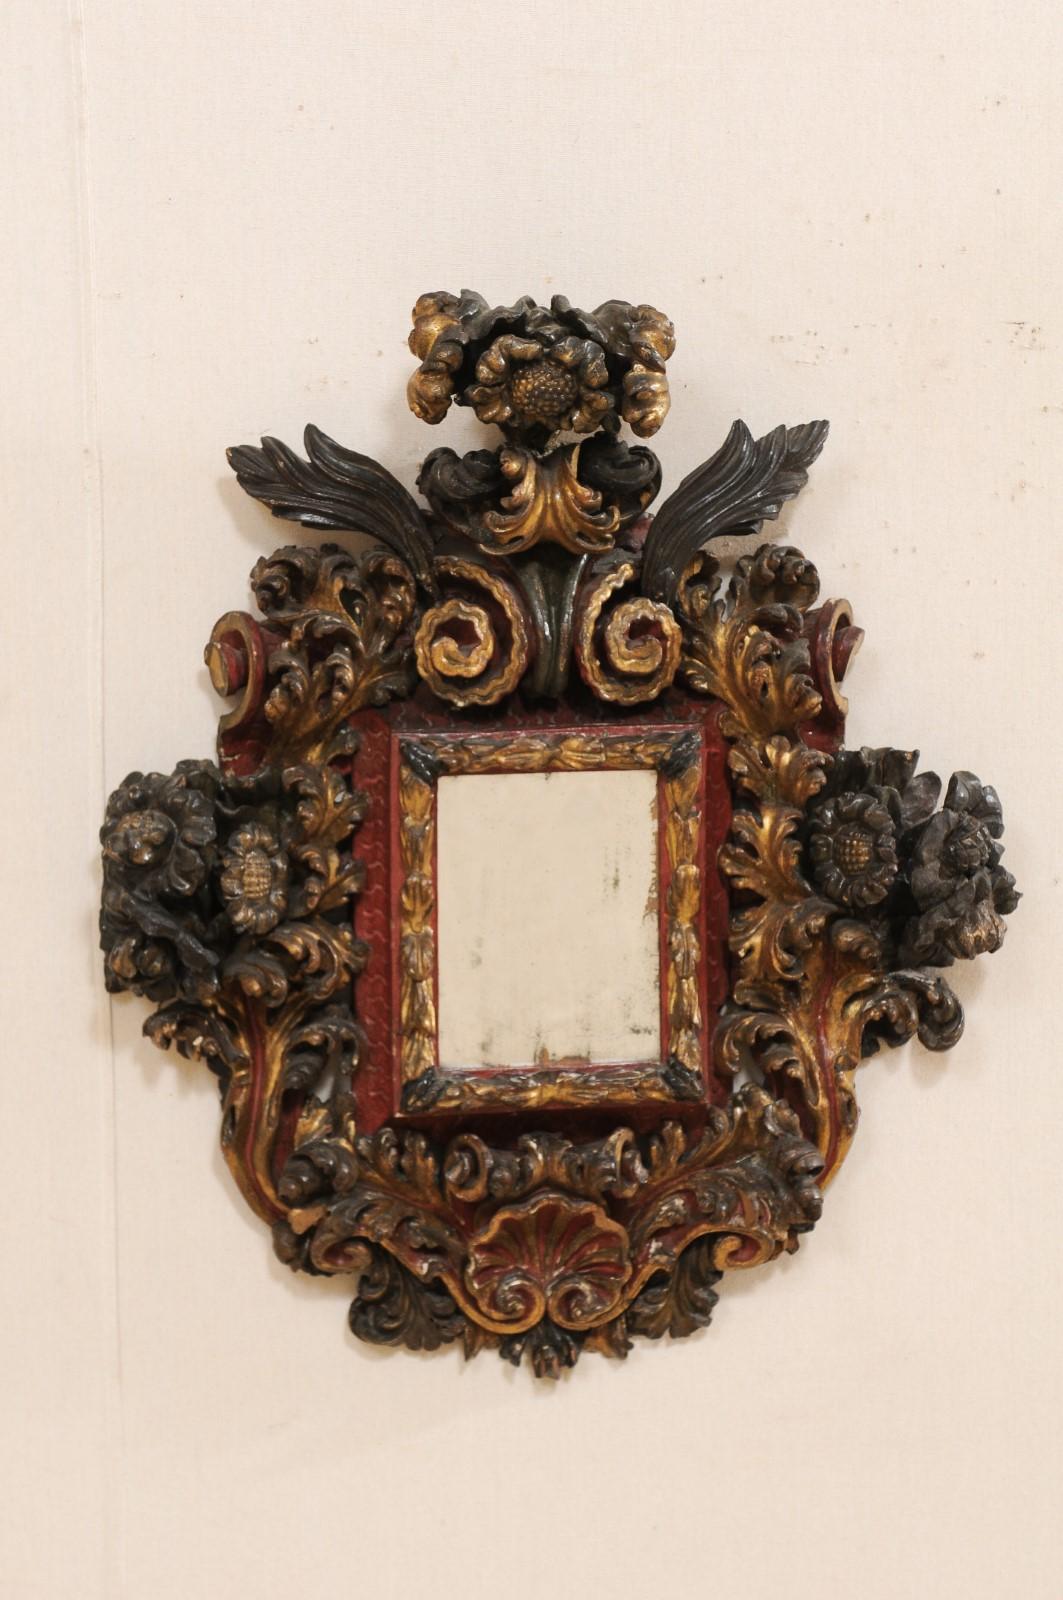 An impressive Italian Baroque carved wood wall plaque with center mirror from the 18th century. This antique wall decoration from Italy features ornate three dimensional hand carvings in a shell, floral, and scrolling acanthus leaf motif, about a